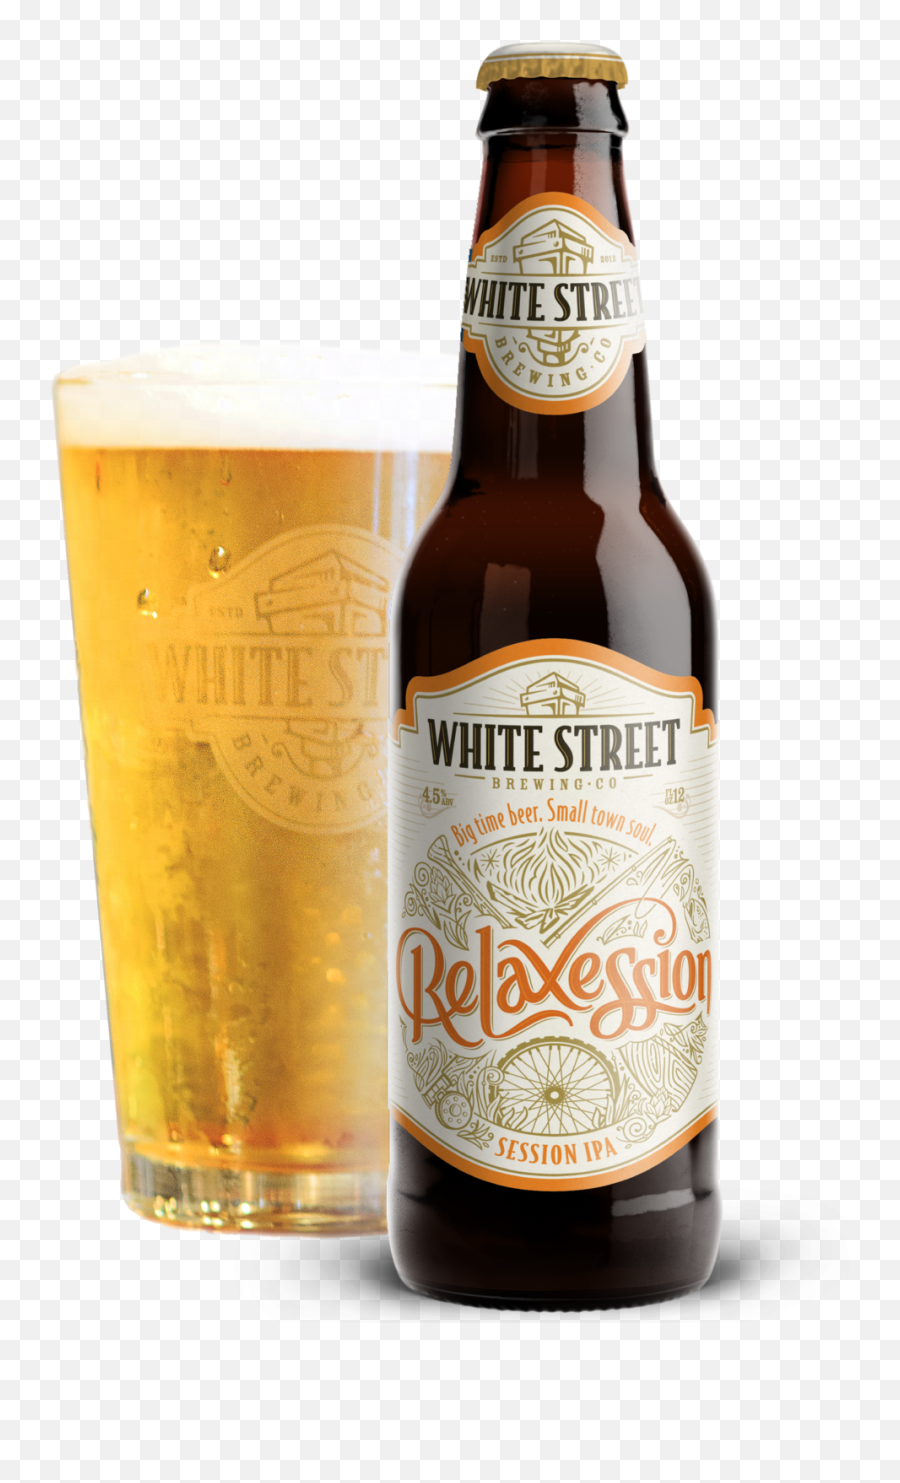 Relaxession U2014 White Street Brewing Co - Kolsch Beer Png,Beer Bottle Transparent Background